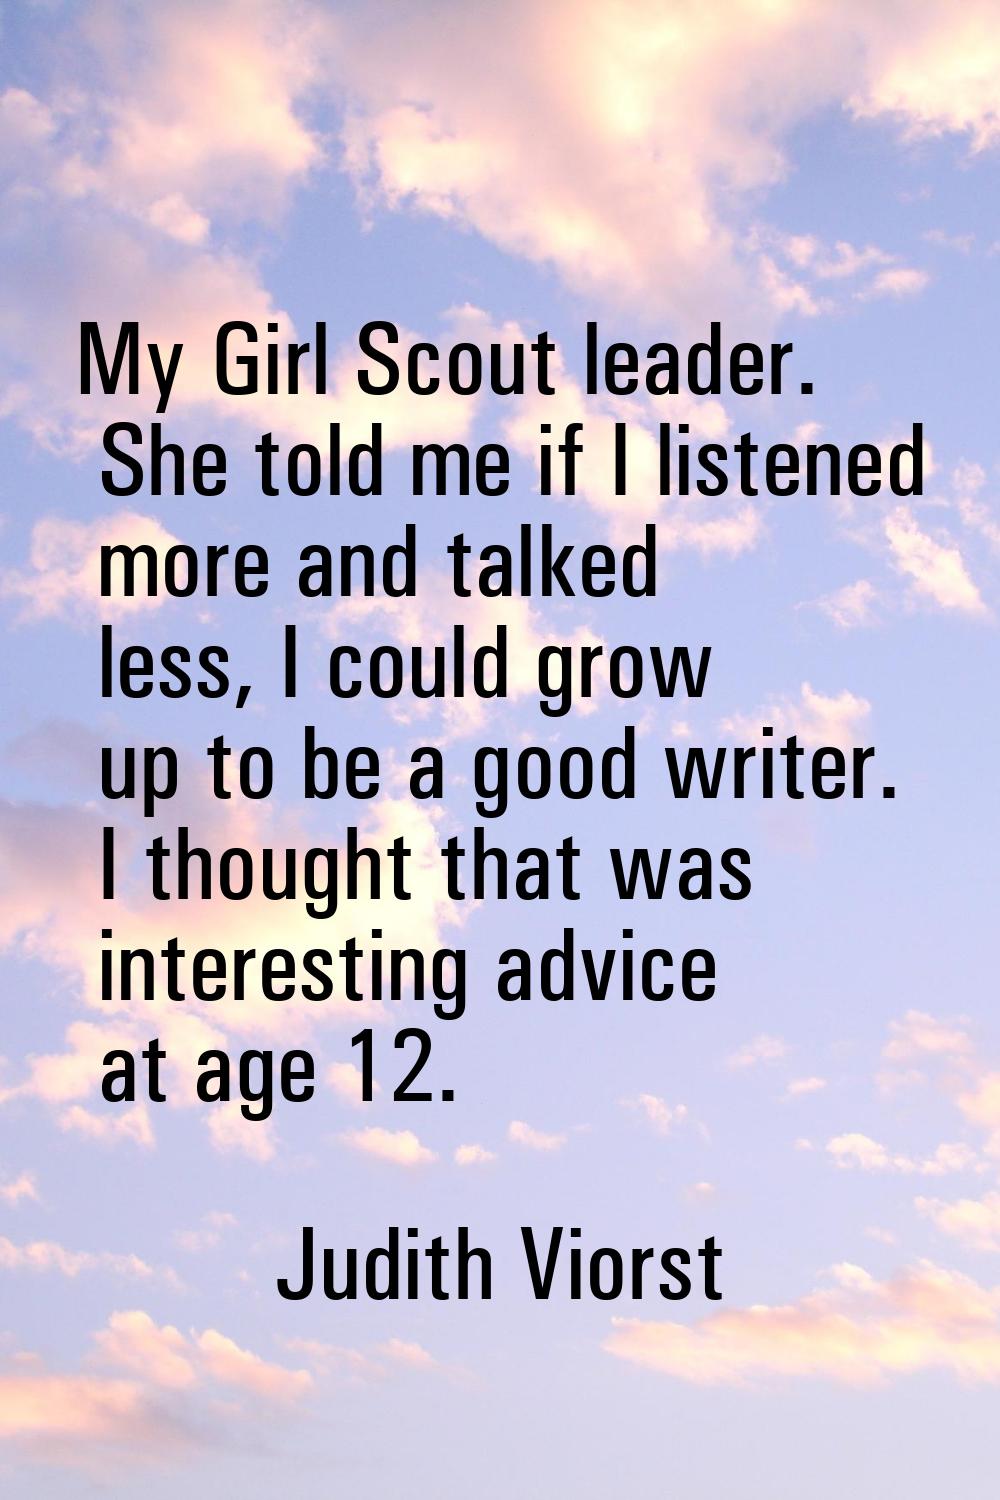 My Girl Scout leader. She told me if I listened more and talked less, I could grow up to be a good 